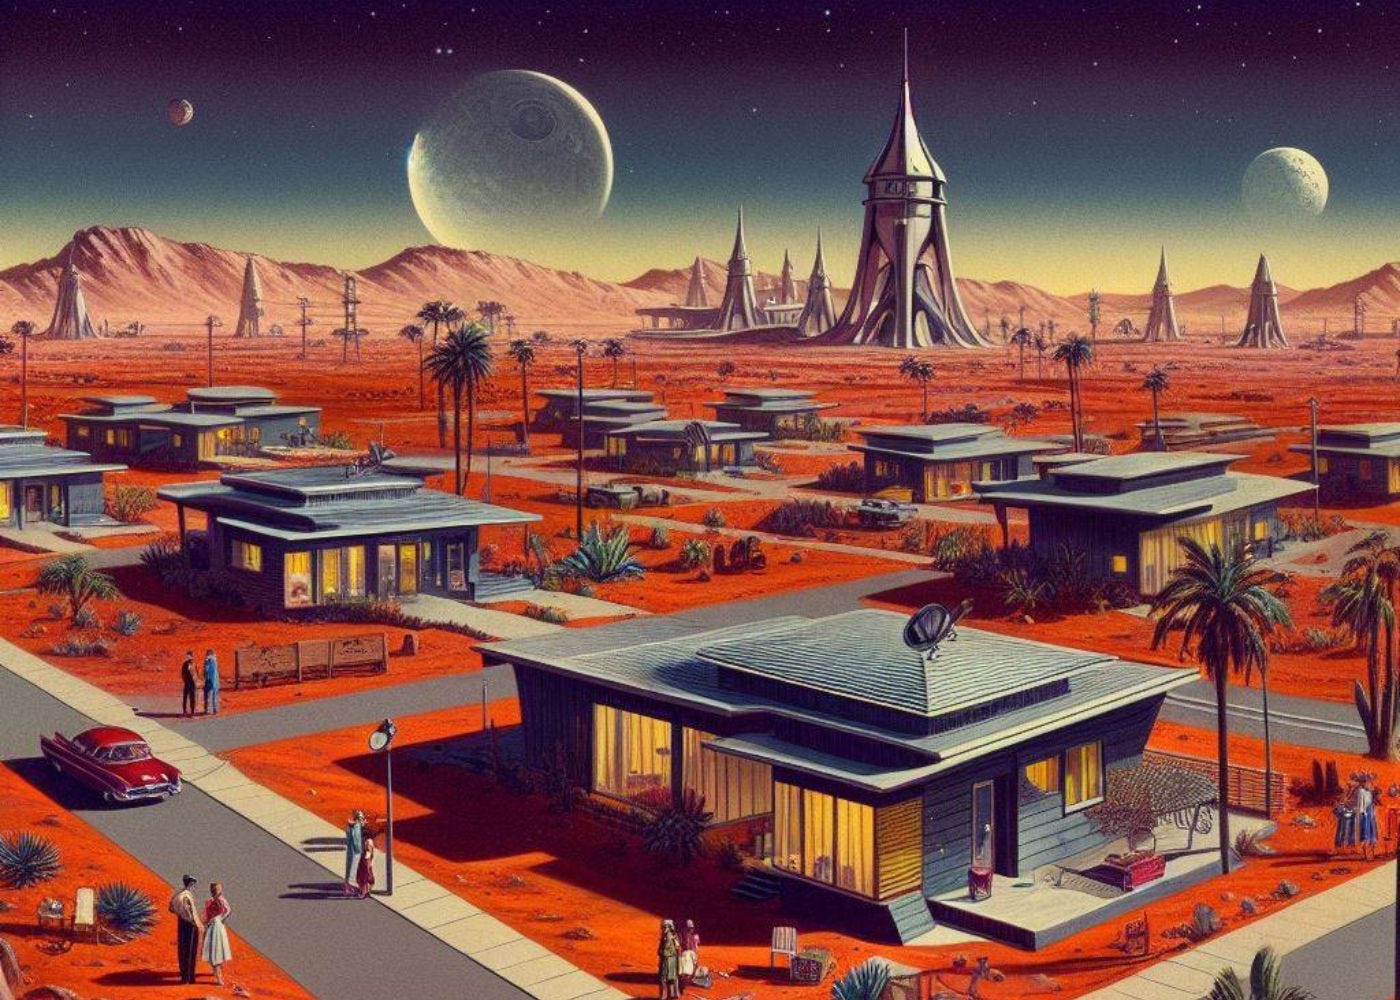 If We Colonize Mars in Our Lifetime…